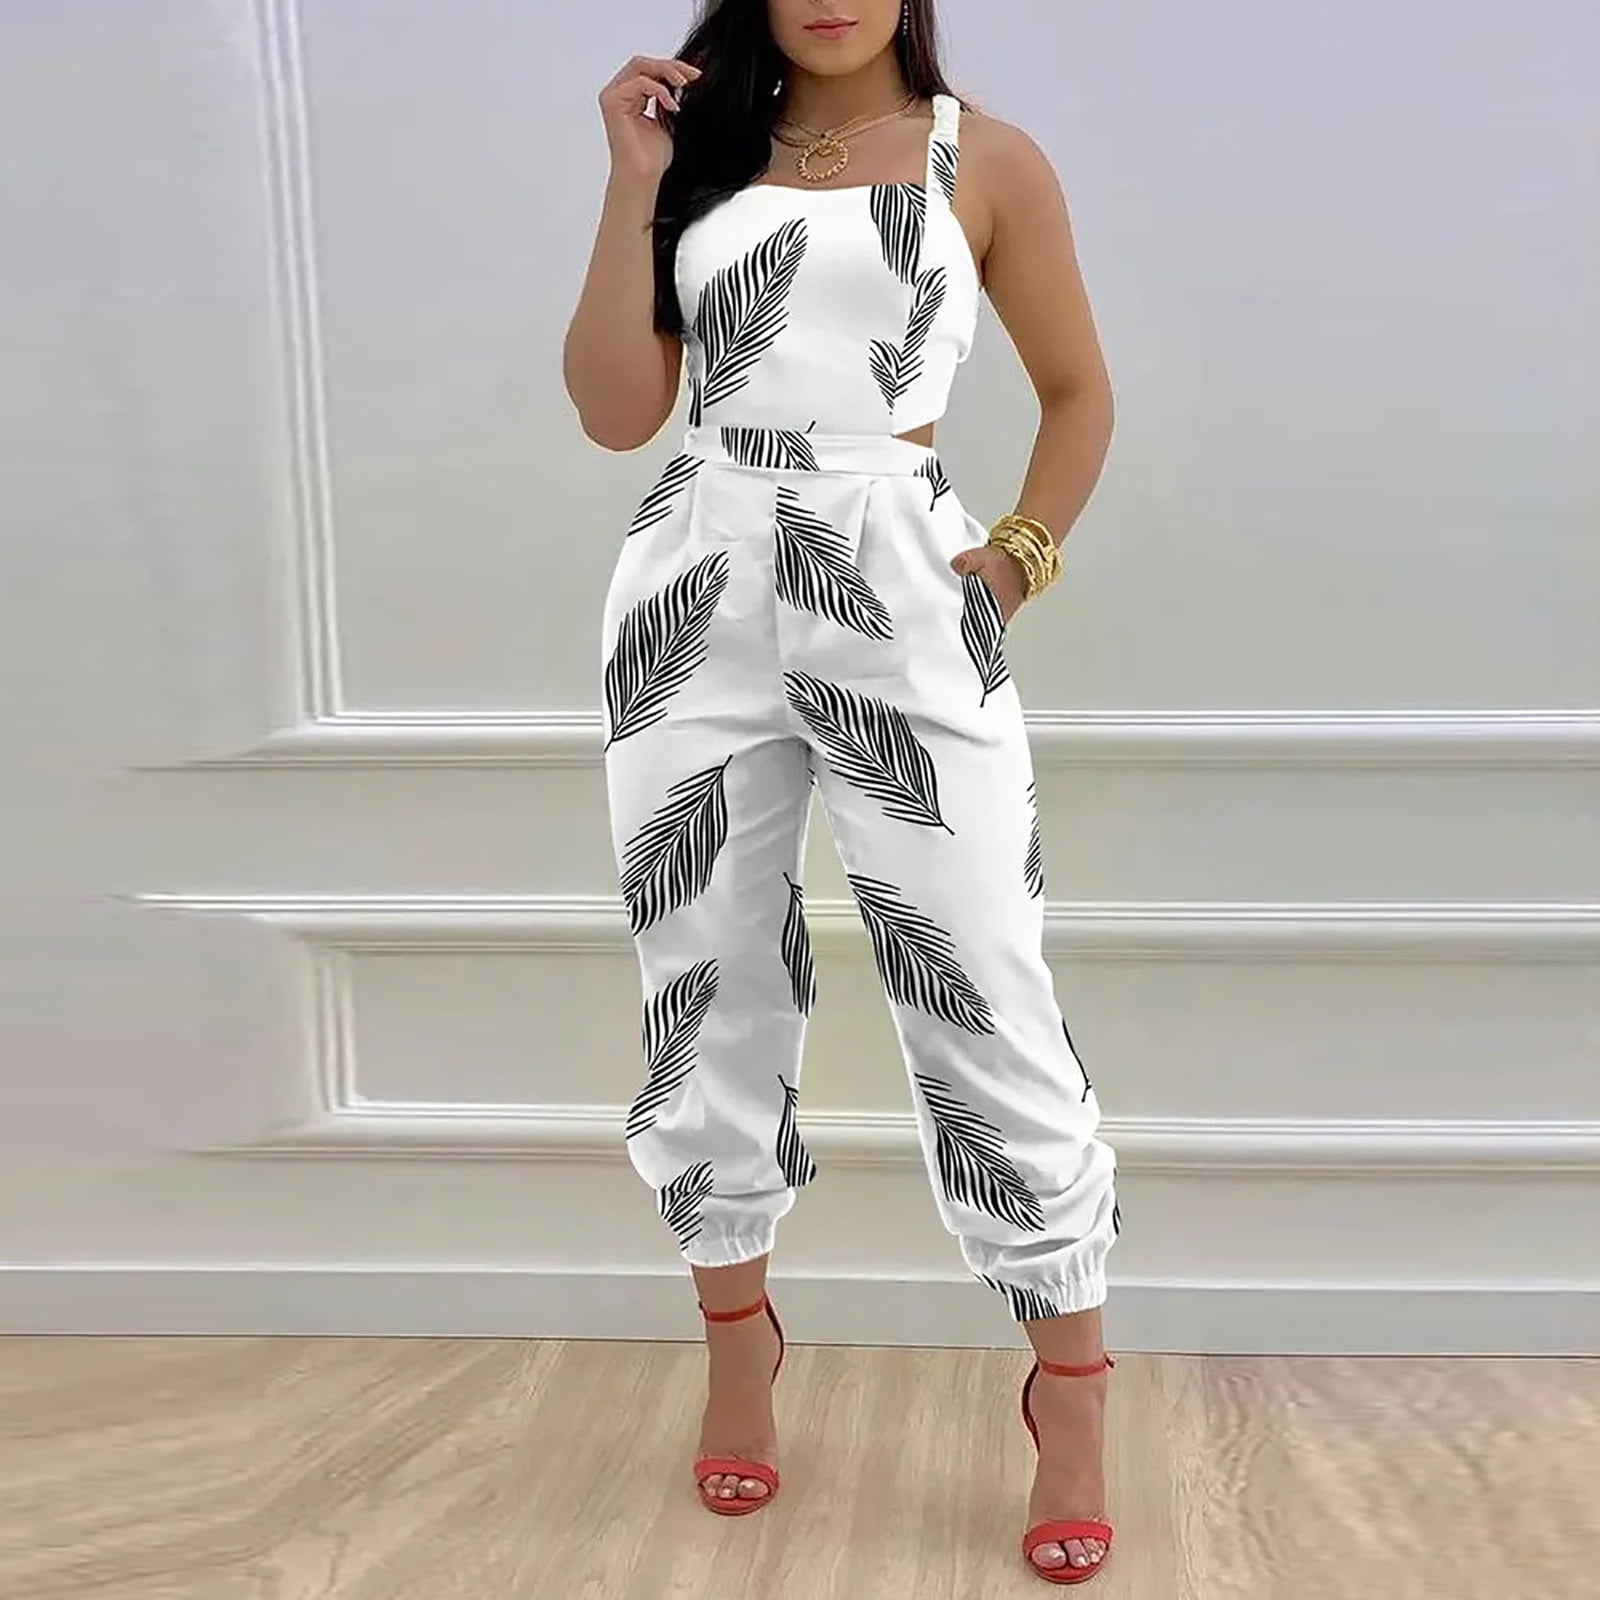 What shoes to wear with jumpsuit?